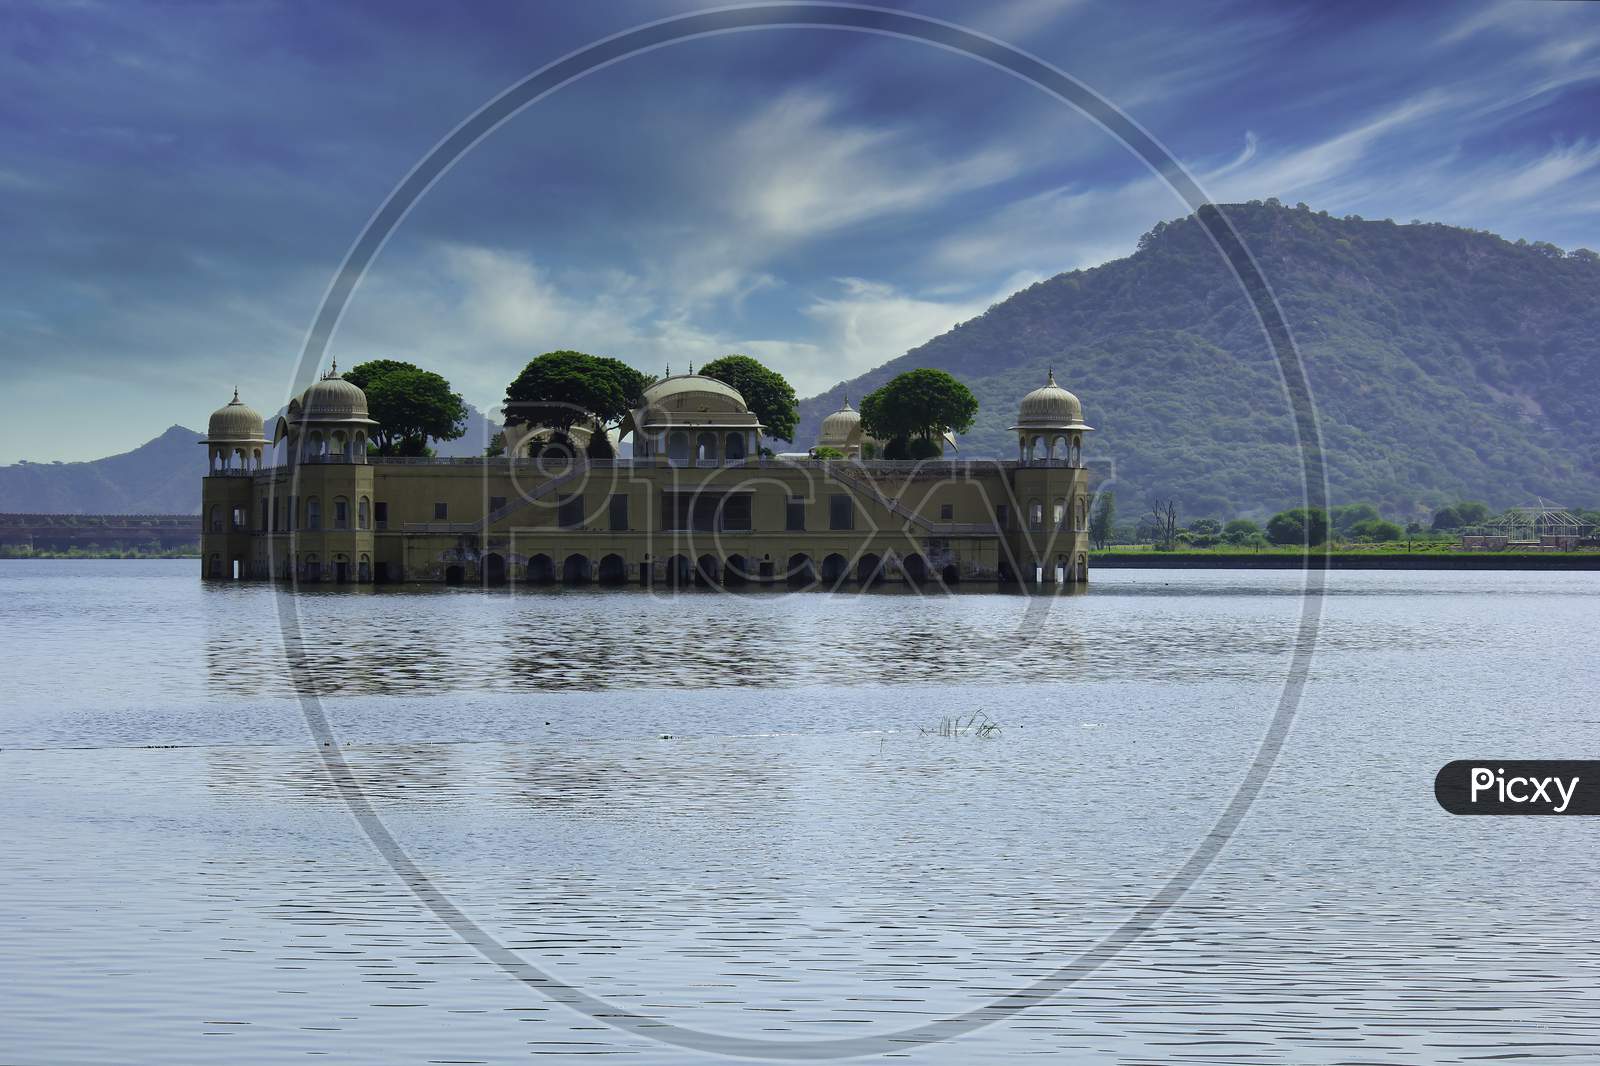 Close Up View Of Jal Mahal (Meaning "Water Palace") Which Is A Palace In The Middle Of The Man Sagar Lake In Jaipur City, The Capital Of The State Of Rajasthan, India. The Palace And The Lake Around It Were Renovated And Enlarged In The 18Th Century By Maharaja Jai Singh Ii Of Amber.